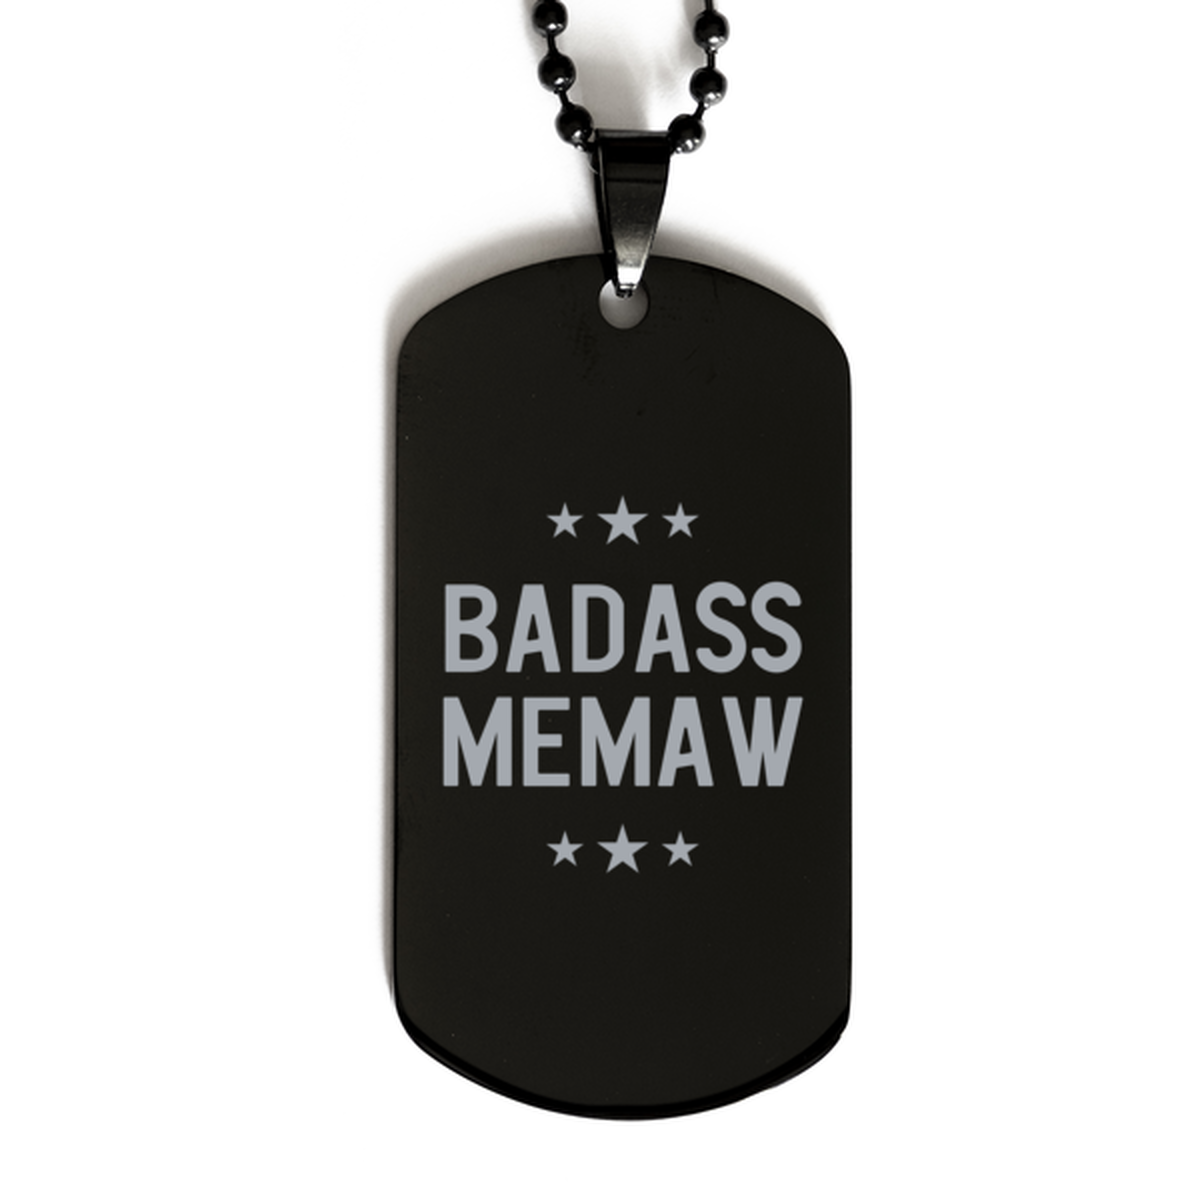 Memaw Black Dog Tag, Badass Memaw, Funny Family Gifts  Necklace For Memaw From Granddaughter Grandson